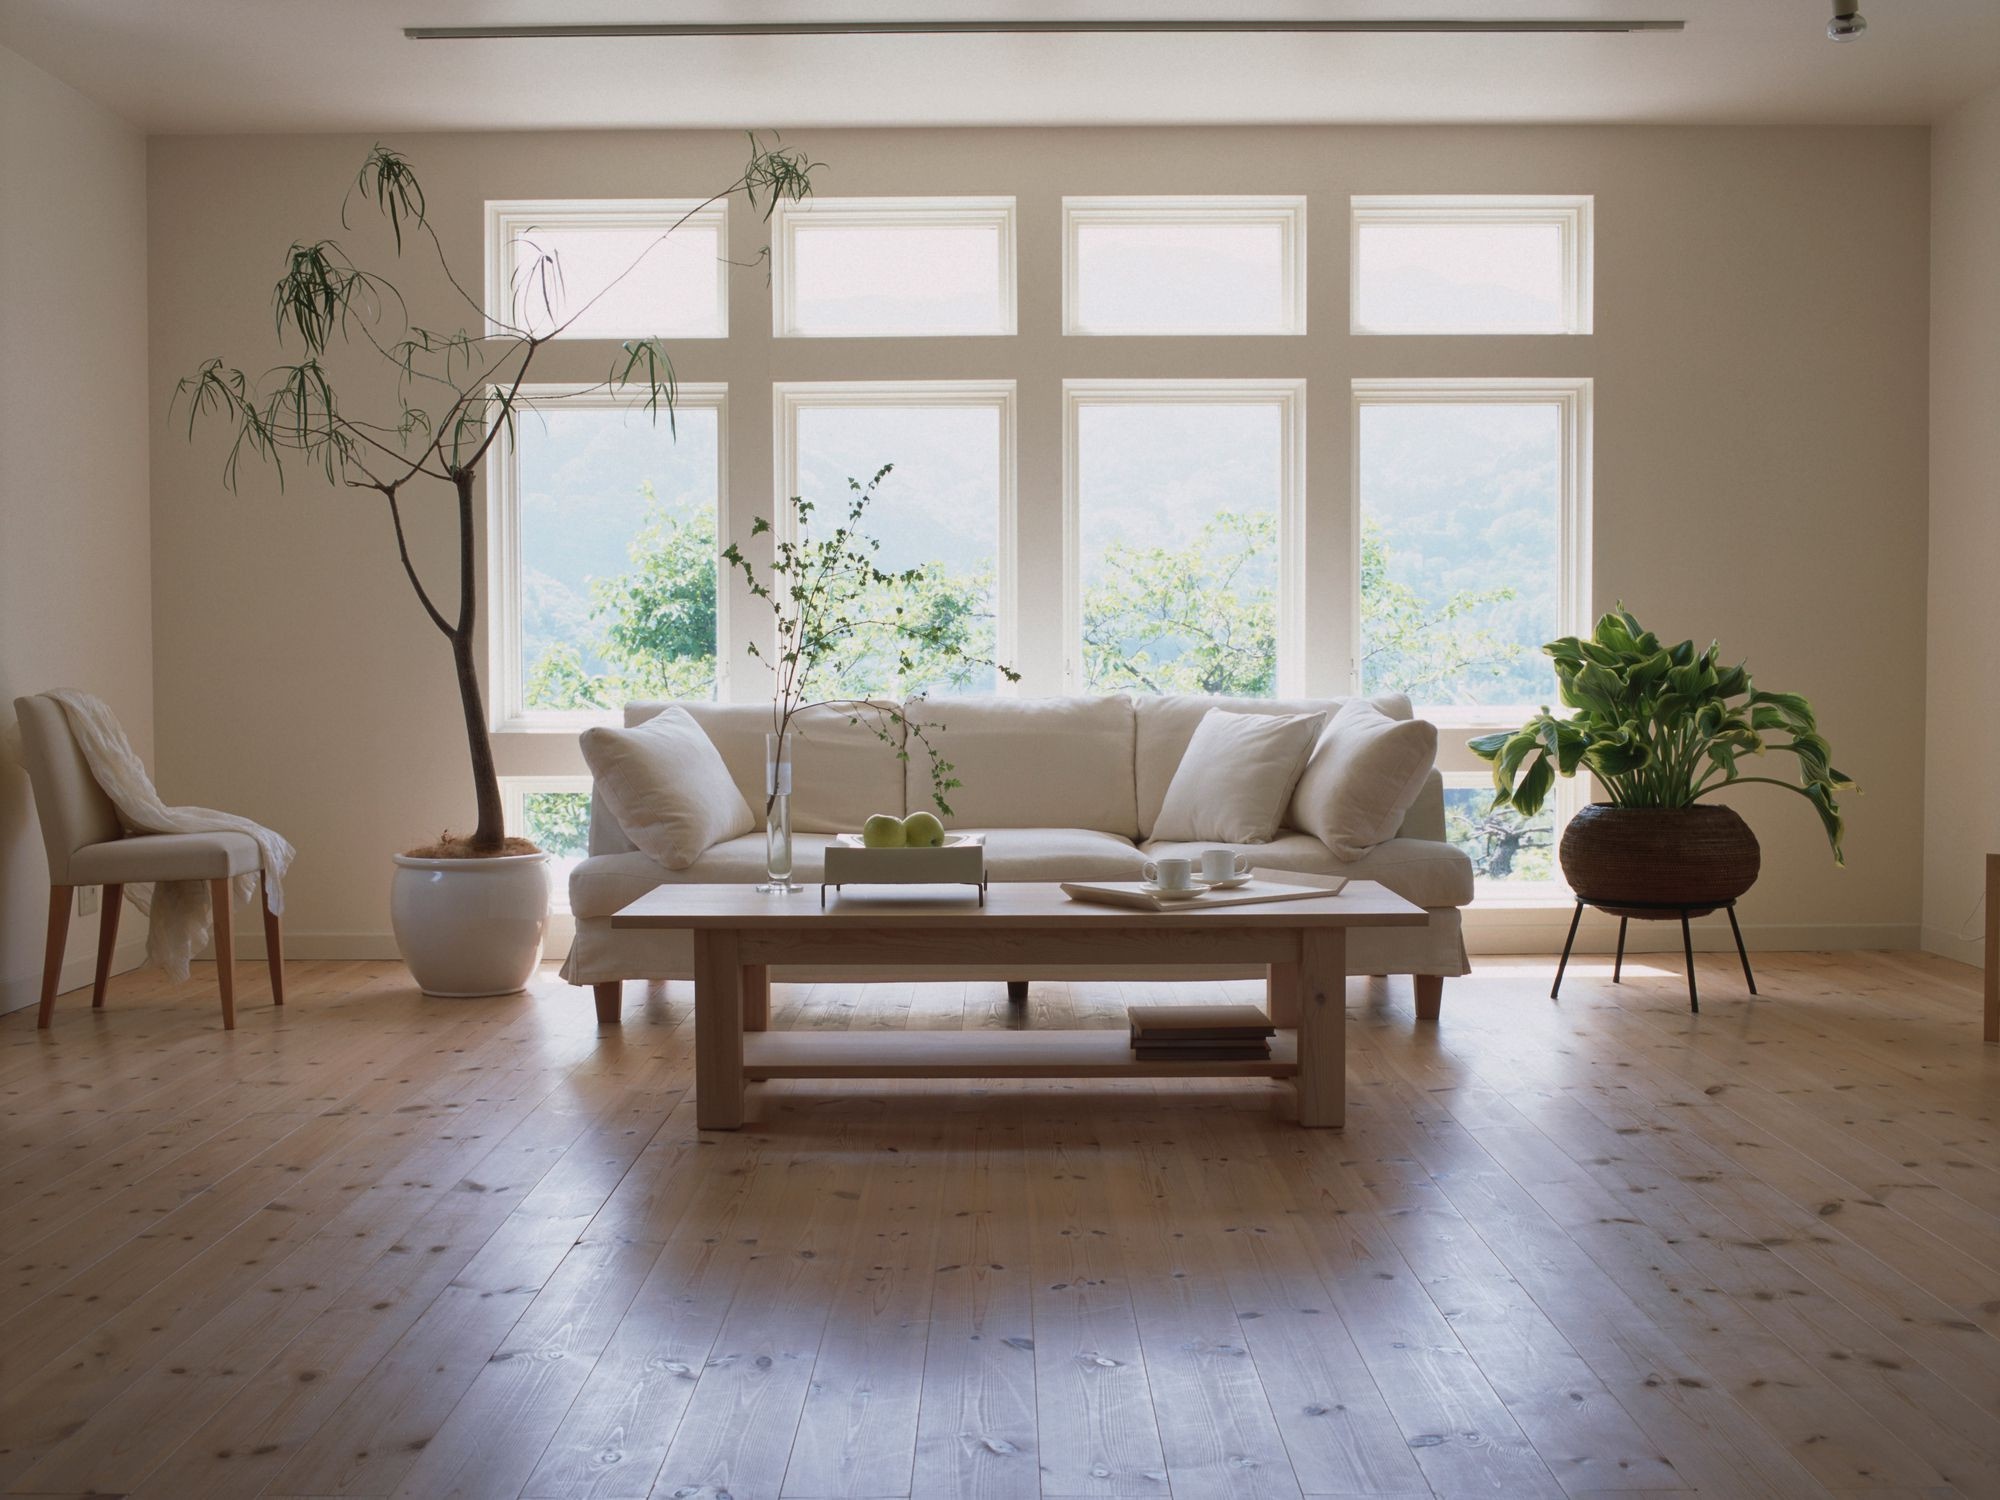 15 Ideal Hardwood Floor Refinishing Fargo Nd 2024 free download hardwood floor refinishing fargo nd of laminate flooring pros and cons inside living room laminate floor gettyimages dexph070 001 58b5cc793df78cdcd8be2938